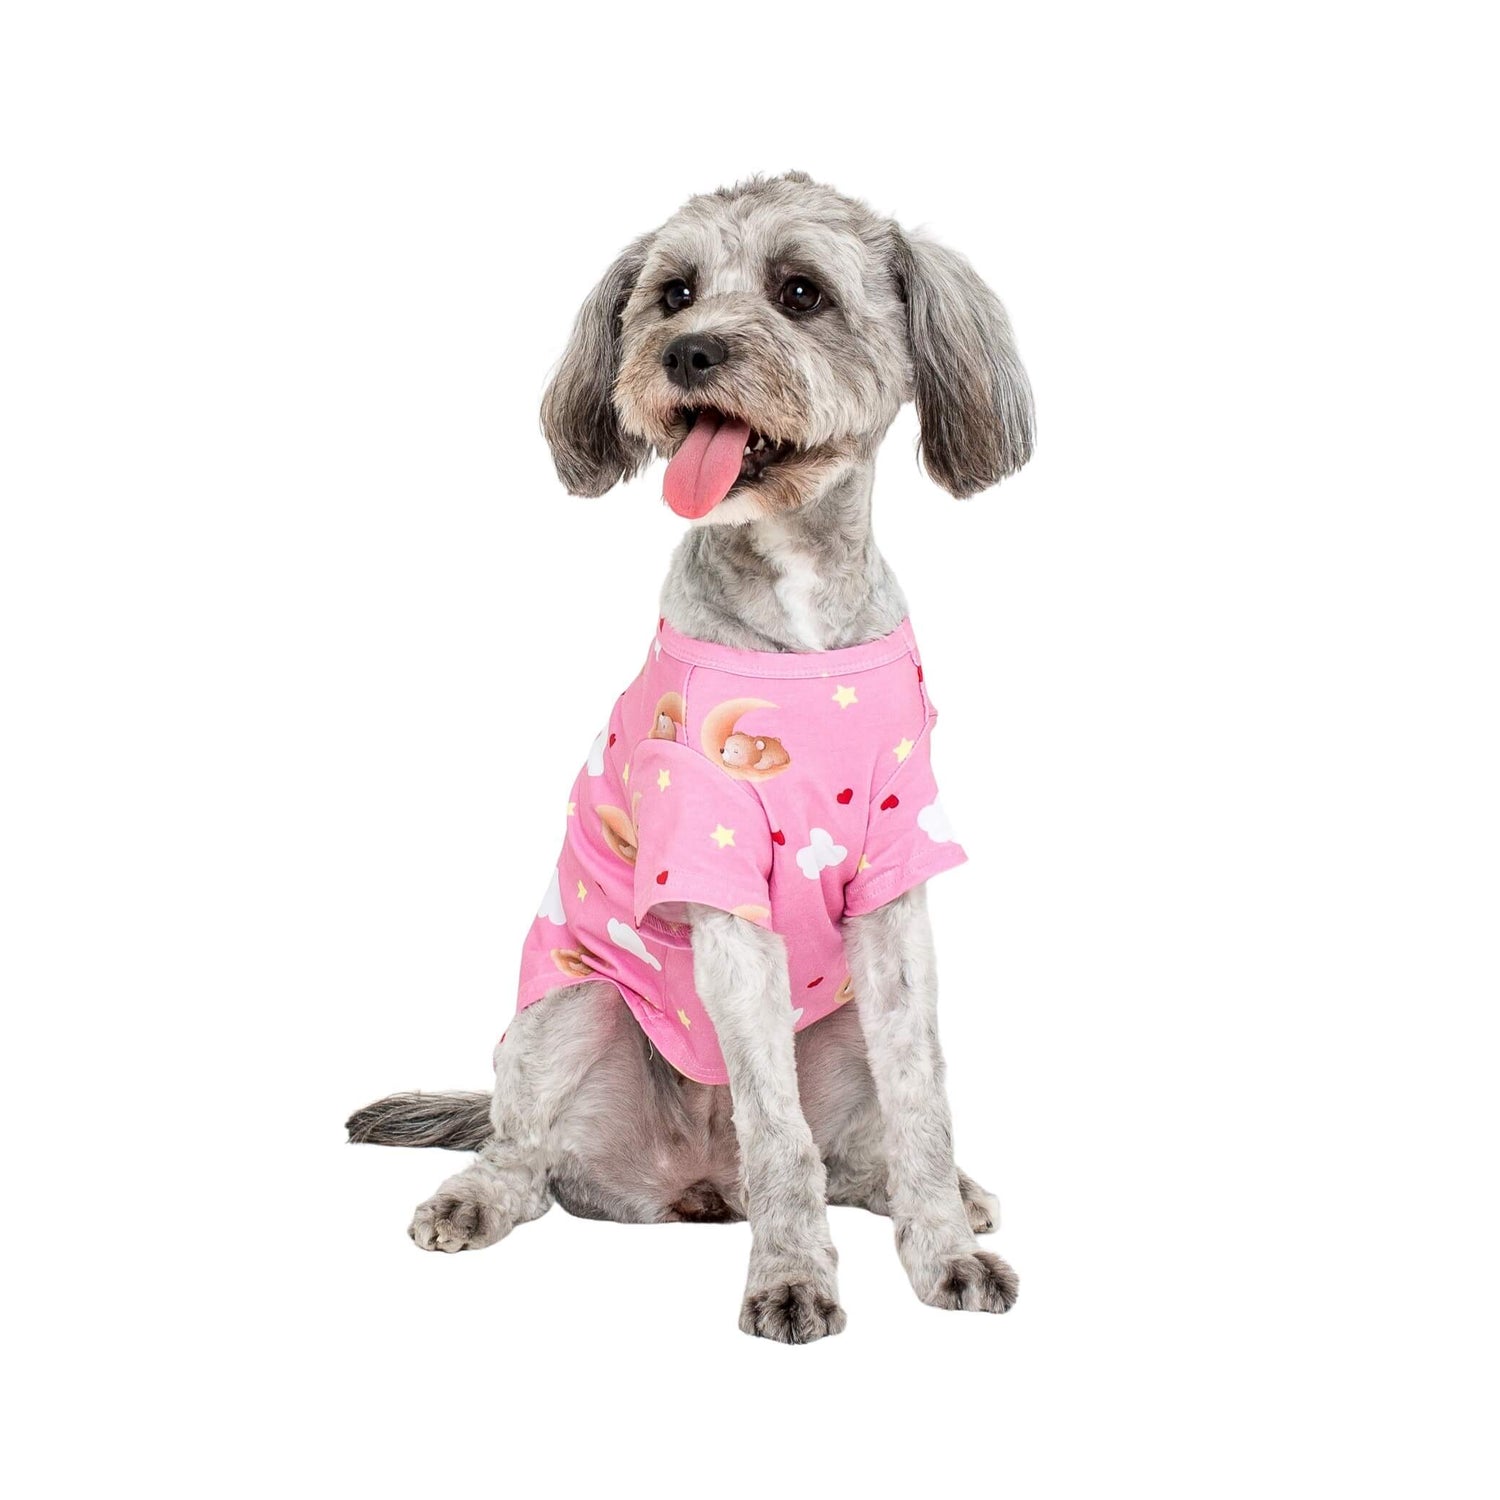 A Cavoodle sitting down wearing Vibrant Hound's Lil dreamer pink dog pyjama. 